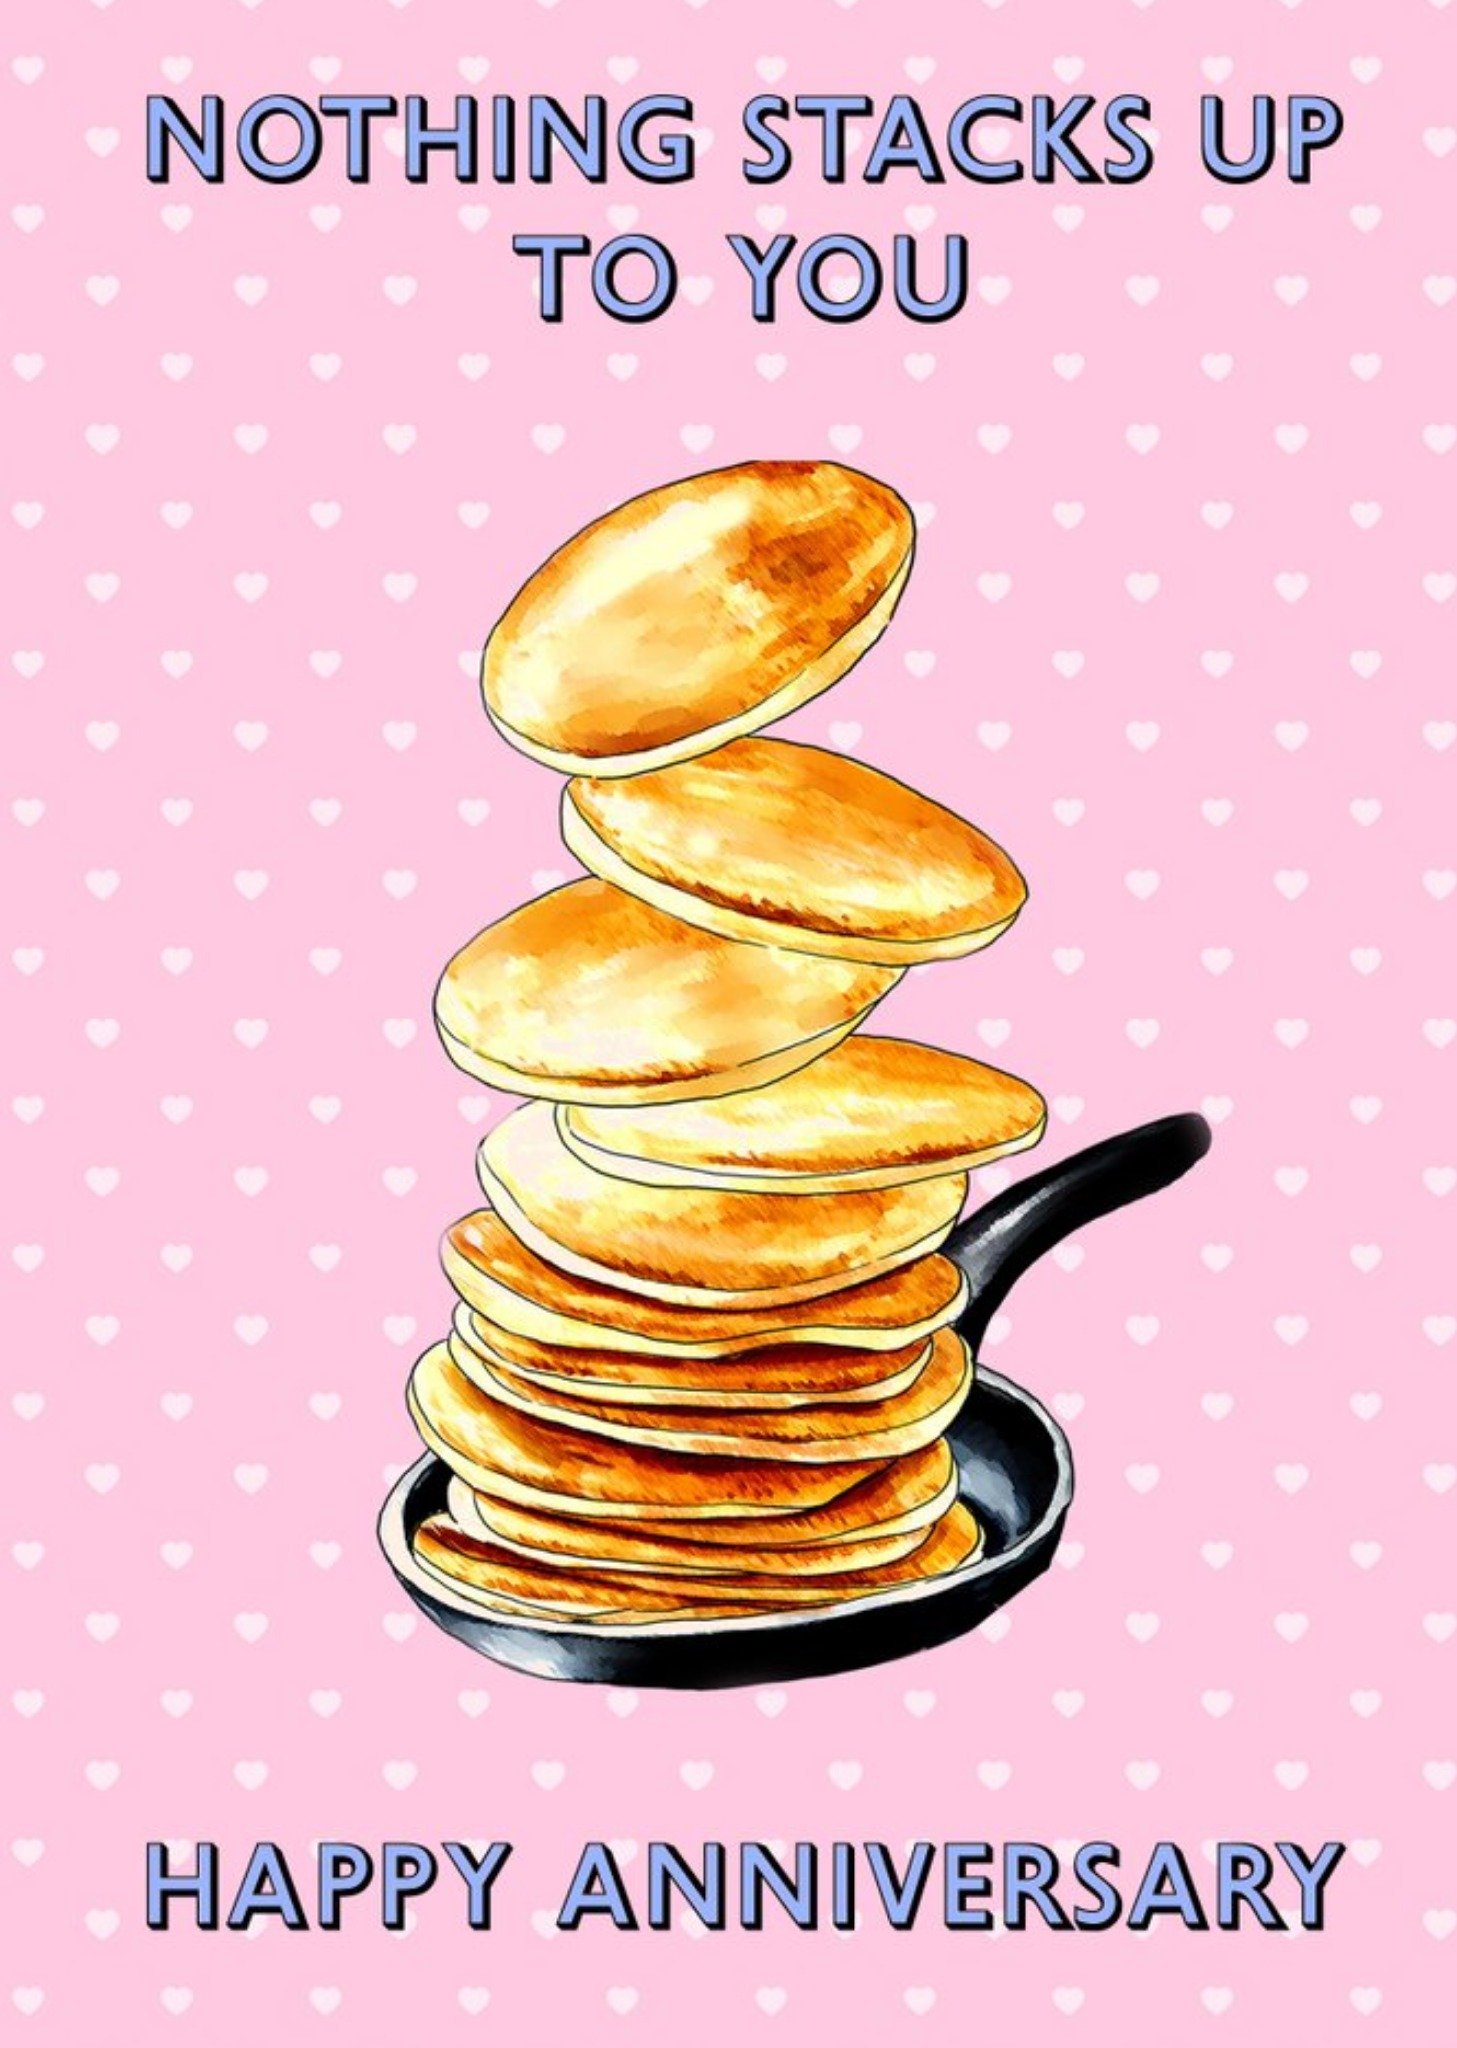 Moonpig Poppy And Mabel Frying Pan And Pancakes, Nothing Stacks Up To You Happy Anniversary Card, La